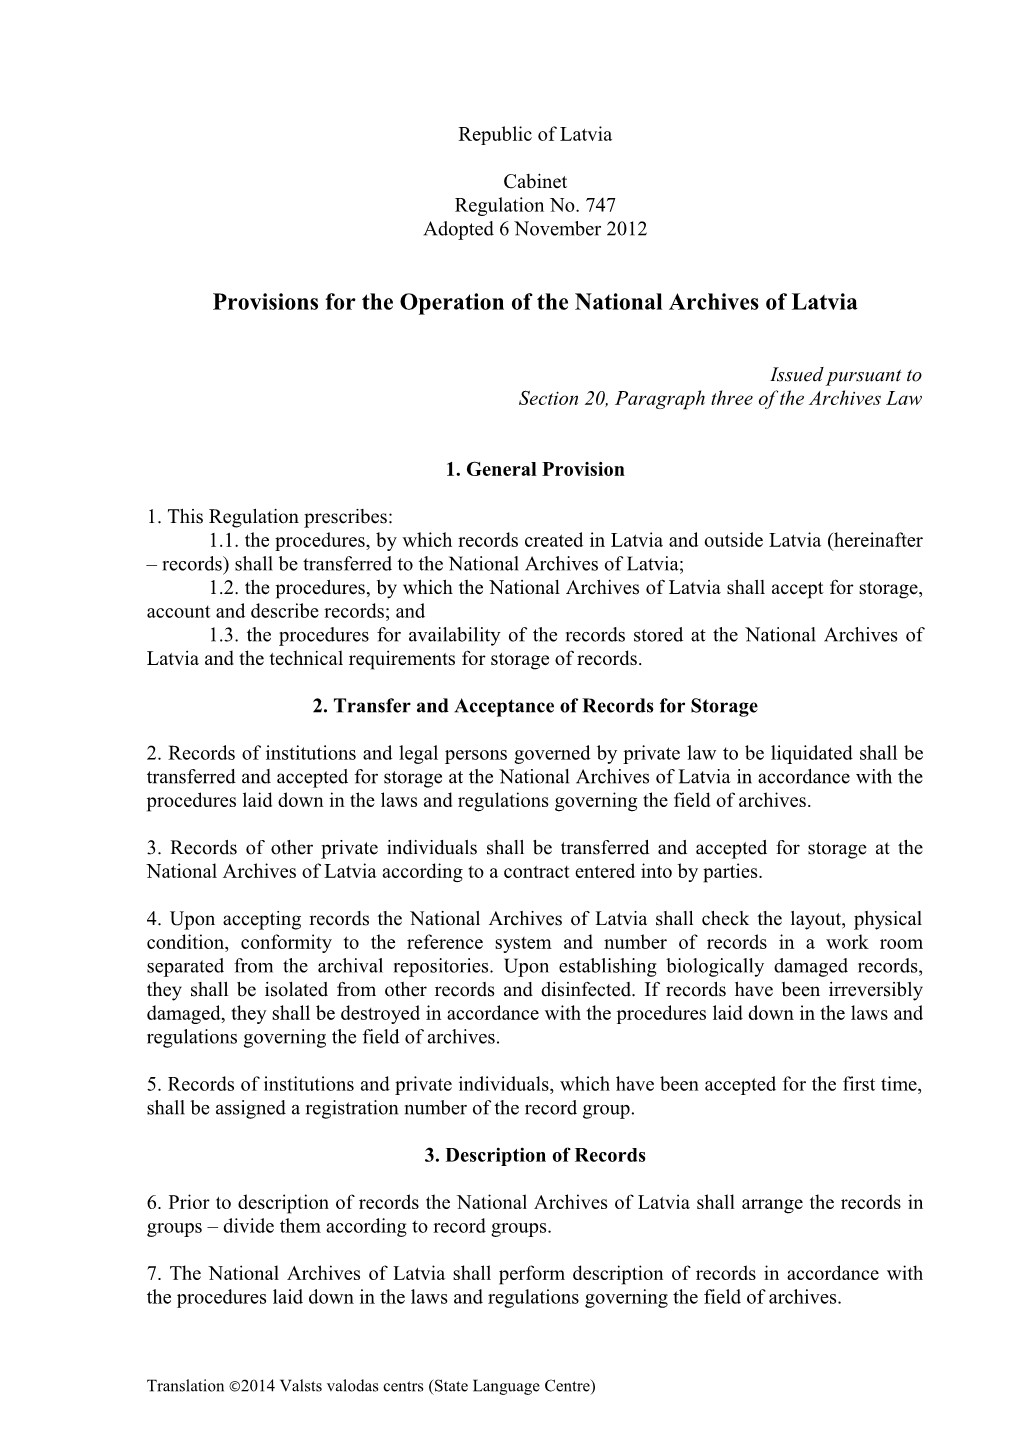 Provisions for the Operation of the National Archives of Latvia